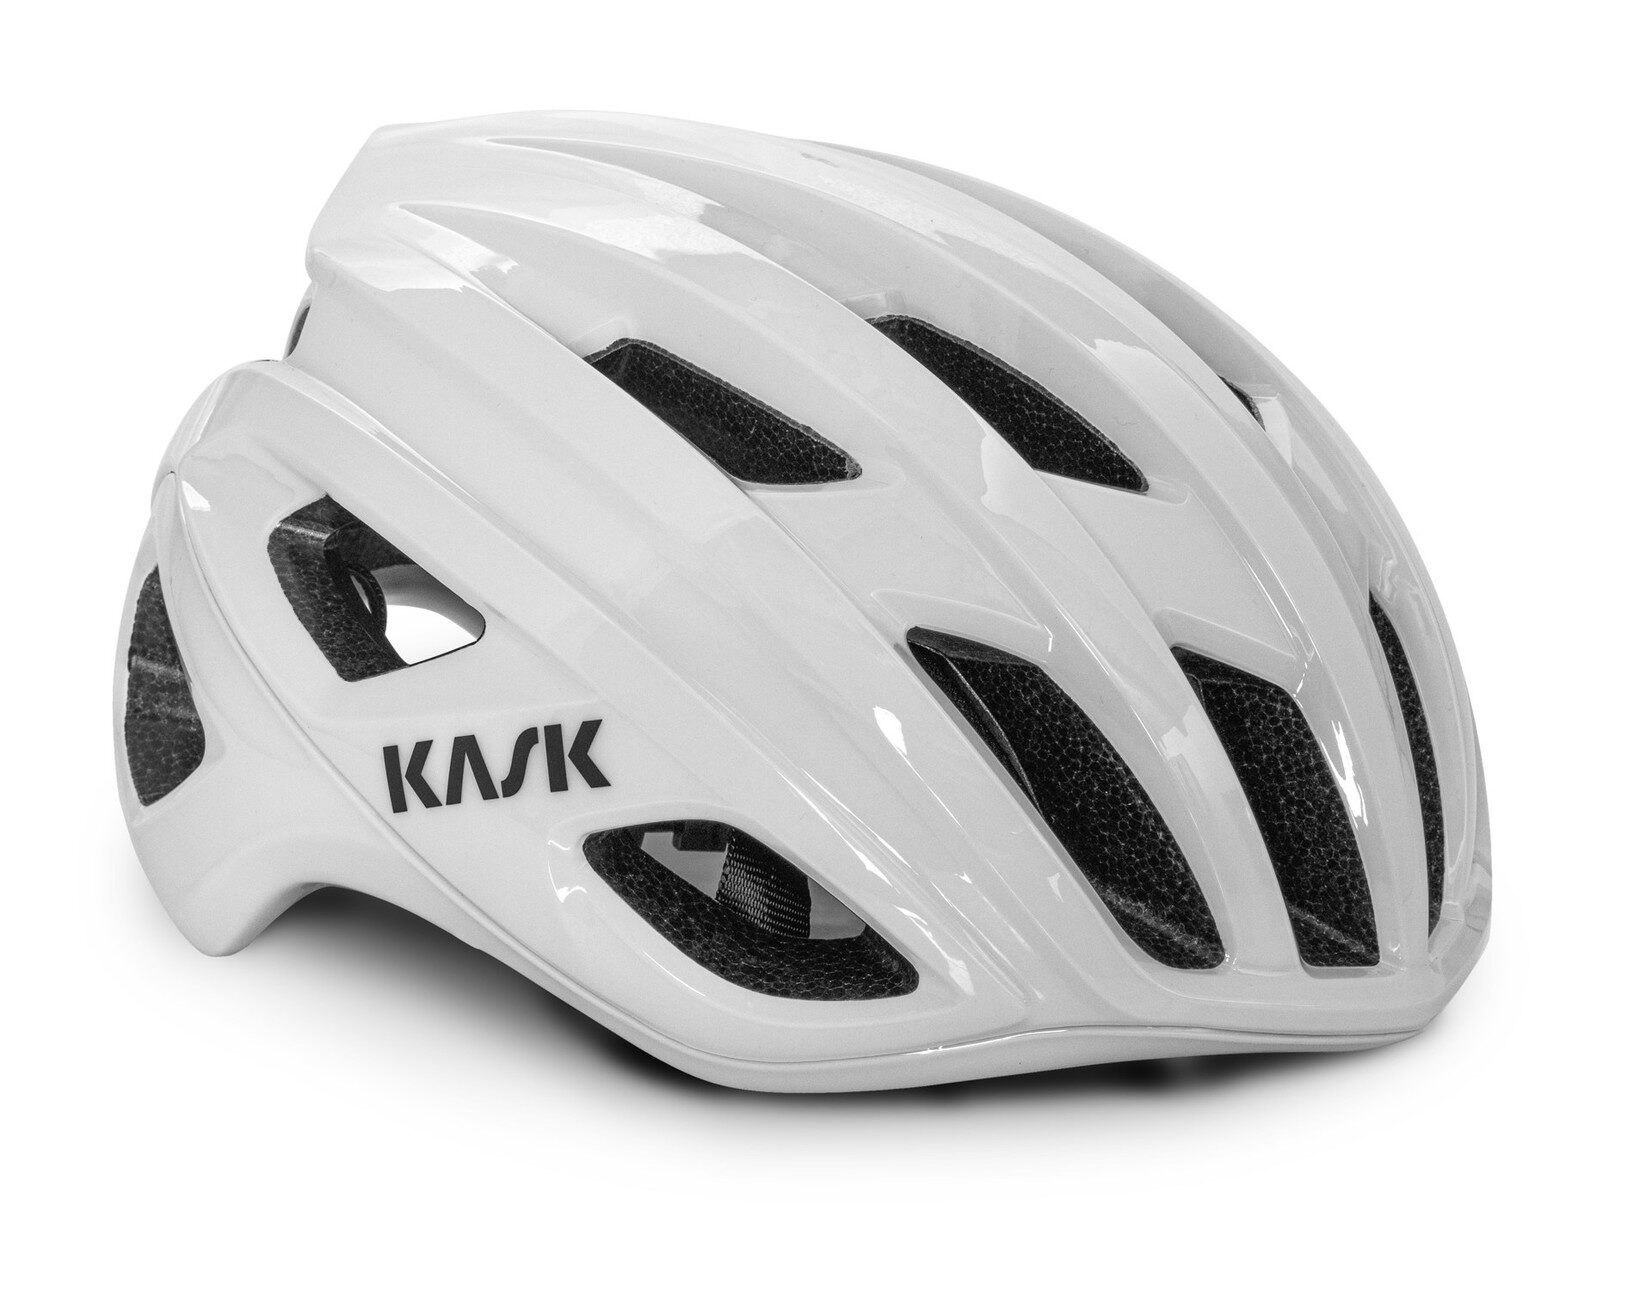 A white bicycle helmet with the word kmk on it.